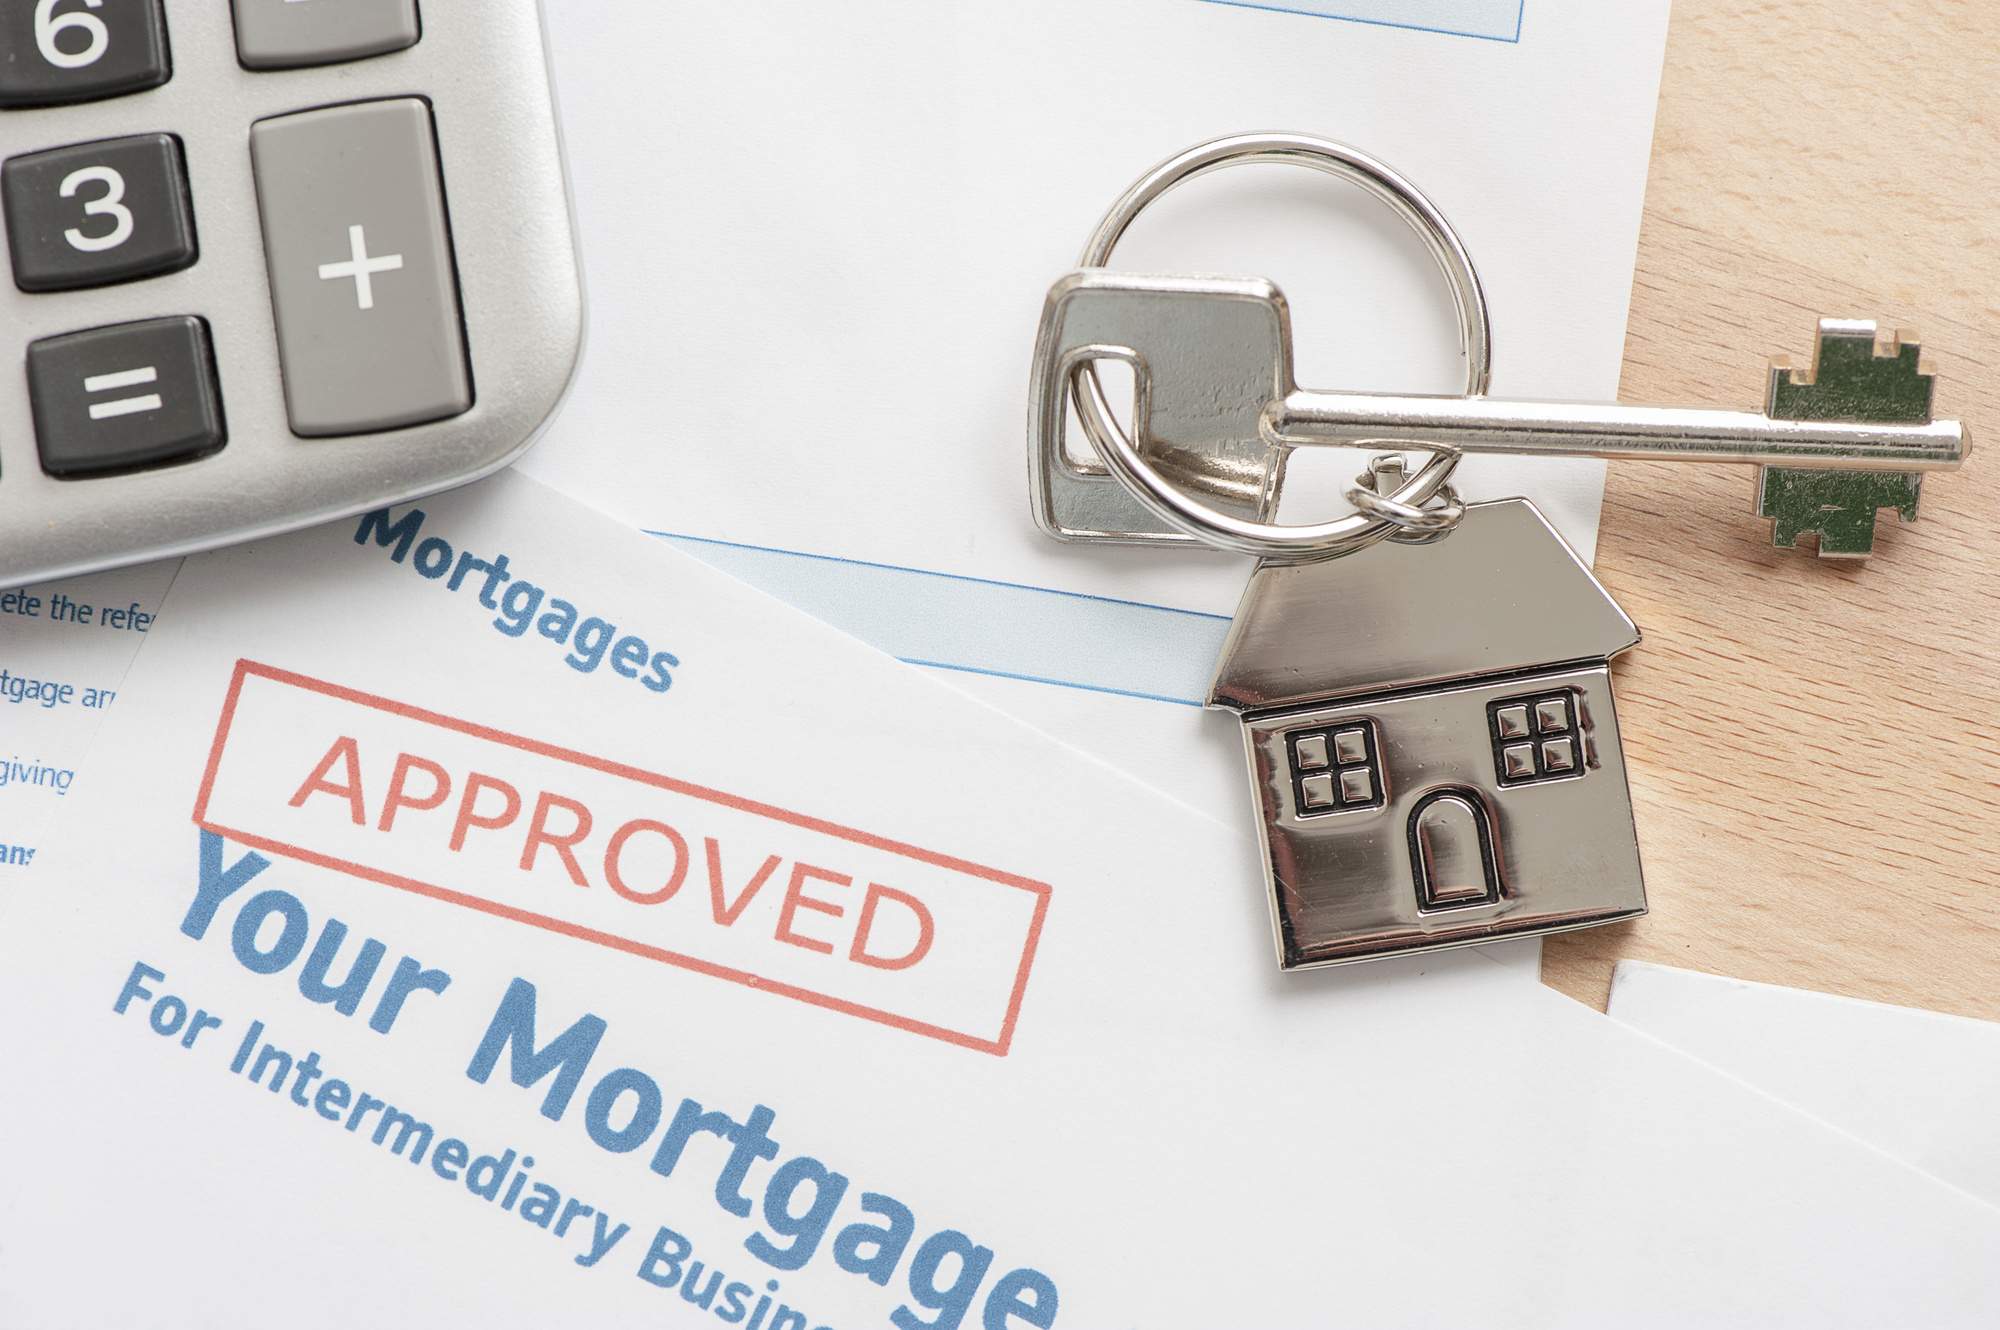 How Does a Mortgage Work? A Guide for First-Time Home Buyers